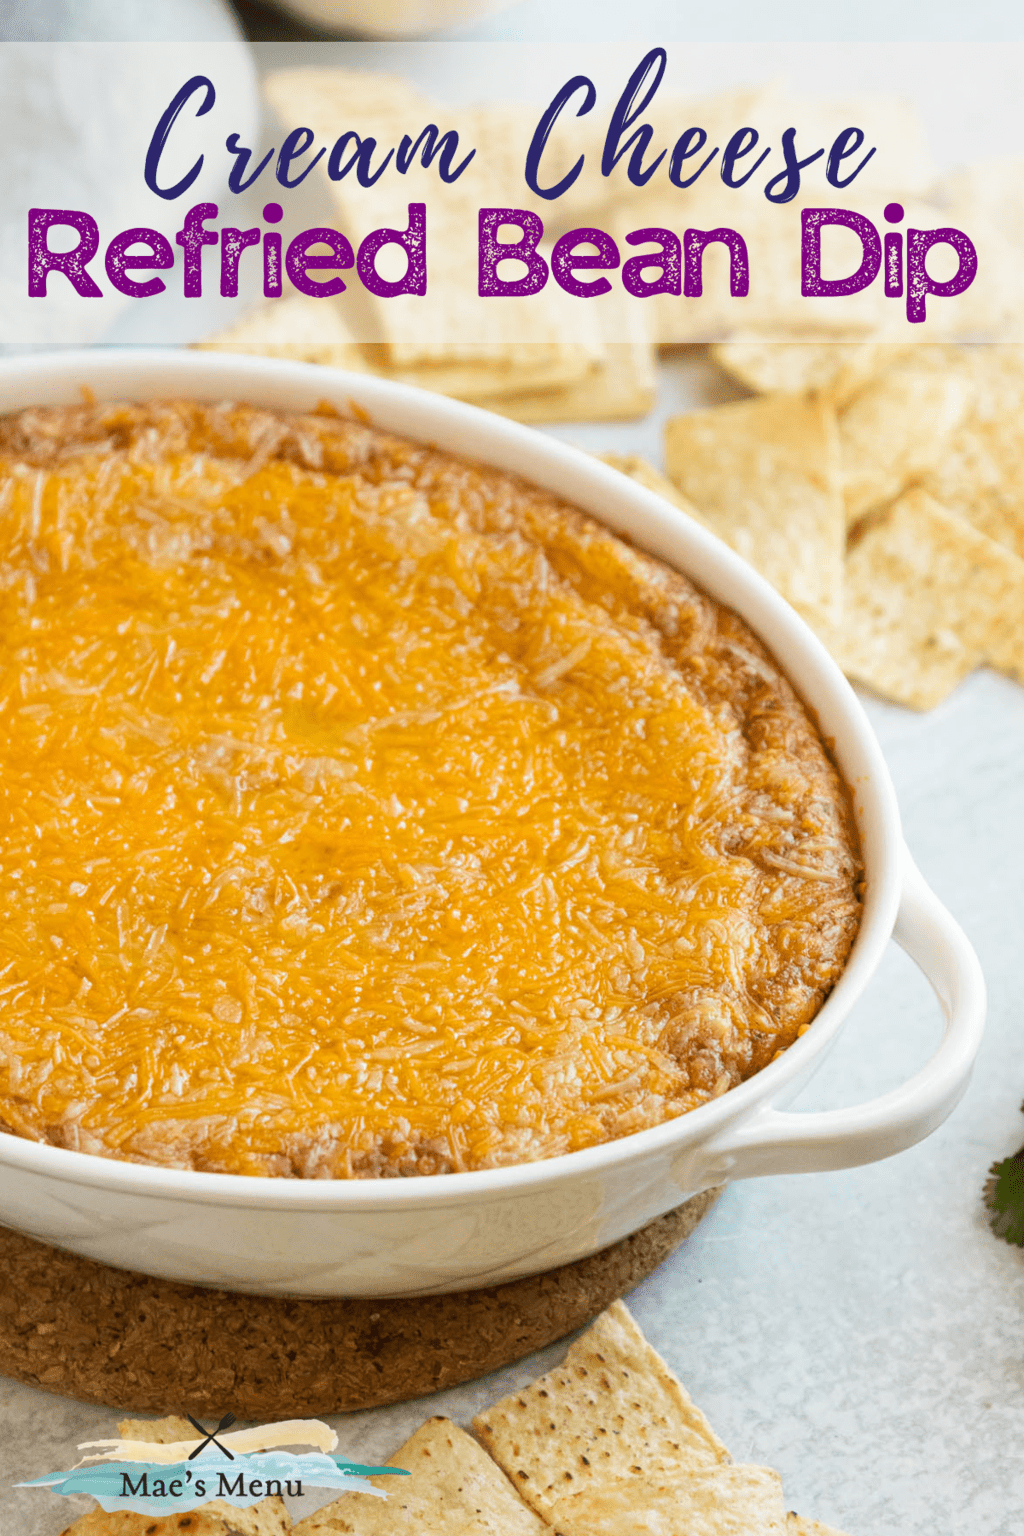 A pinterest pin for cream cheese refried bean dip with chips.